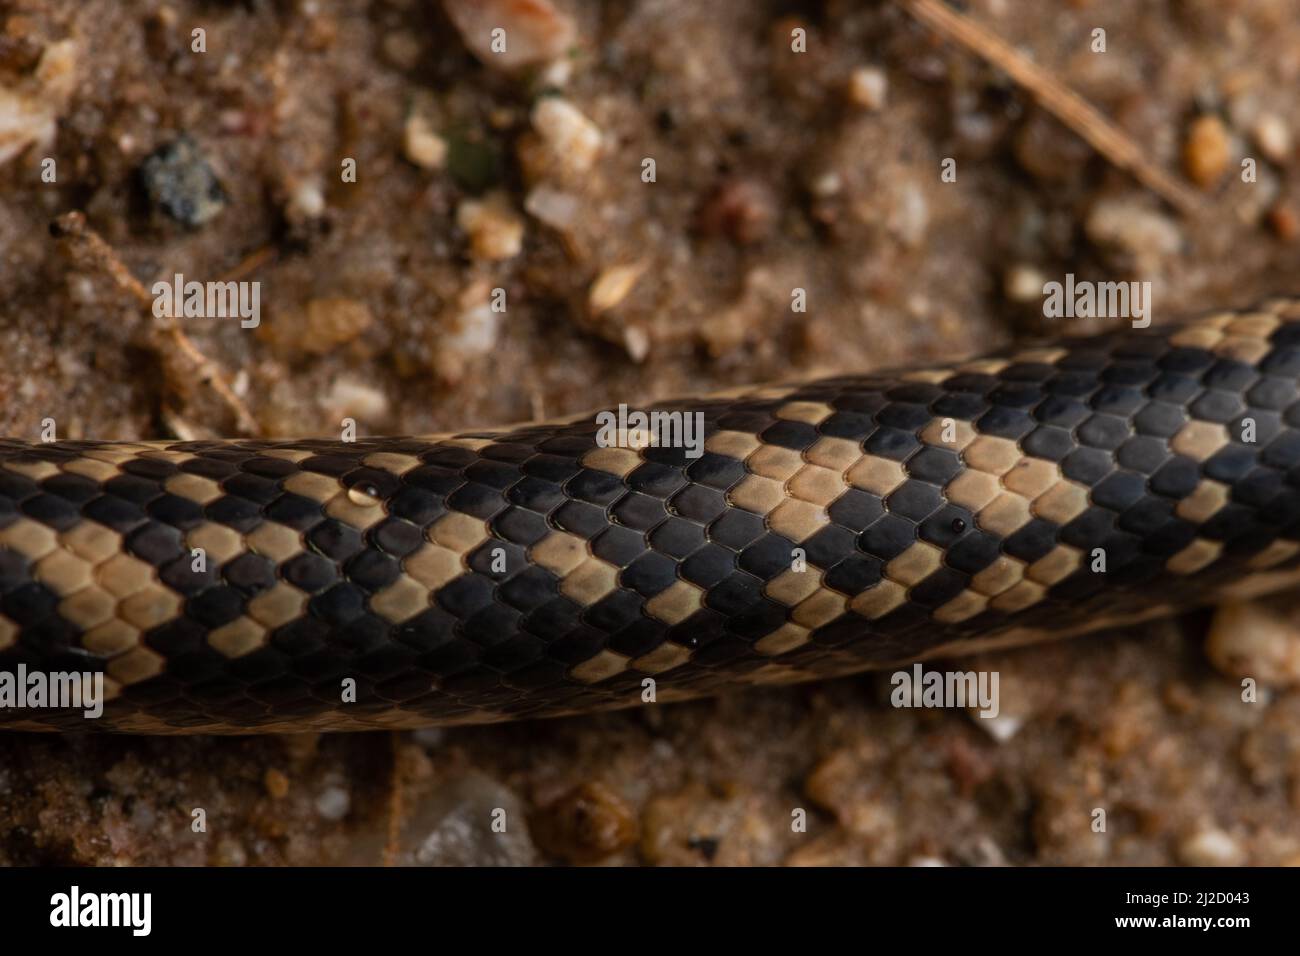 The scales of a coastal sand snake (Oxyrhopus fitzingeri) showing its disruptive coloration which helps keep the snake hidden. Stock Photo